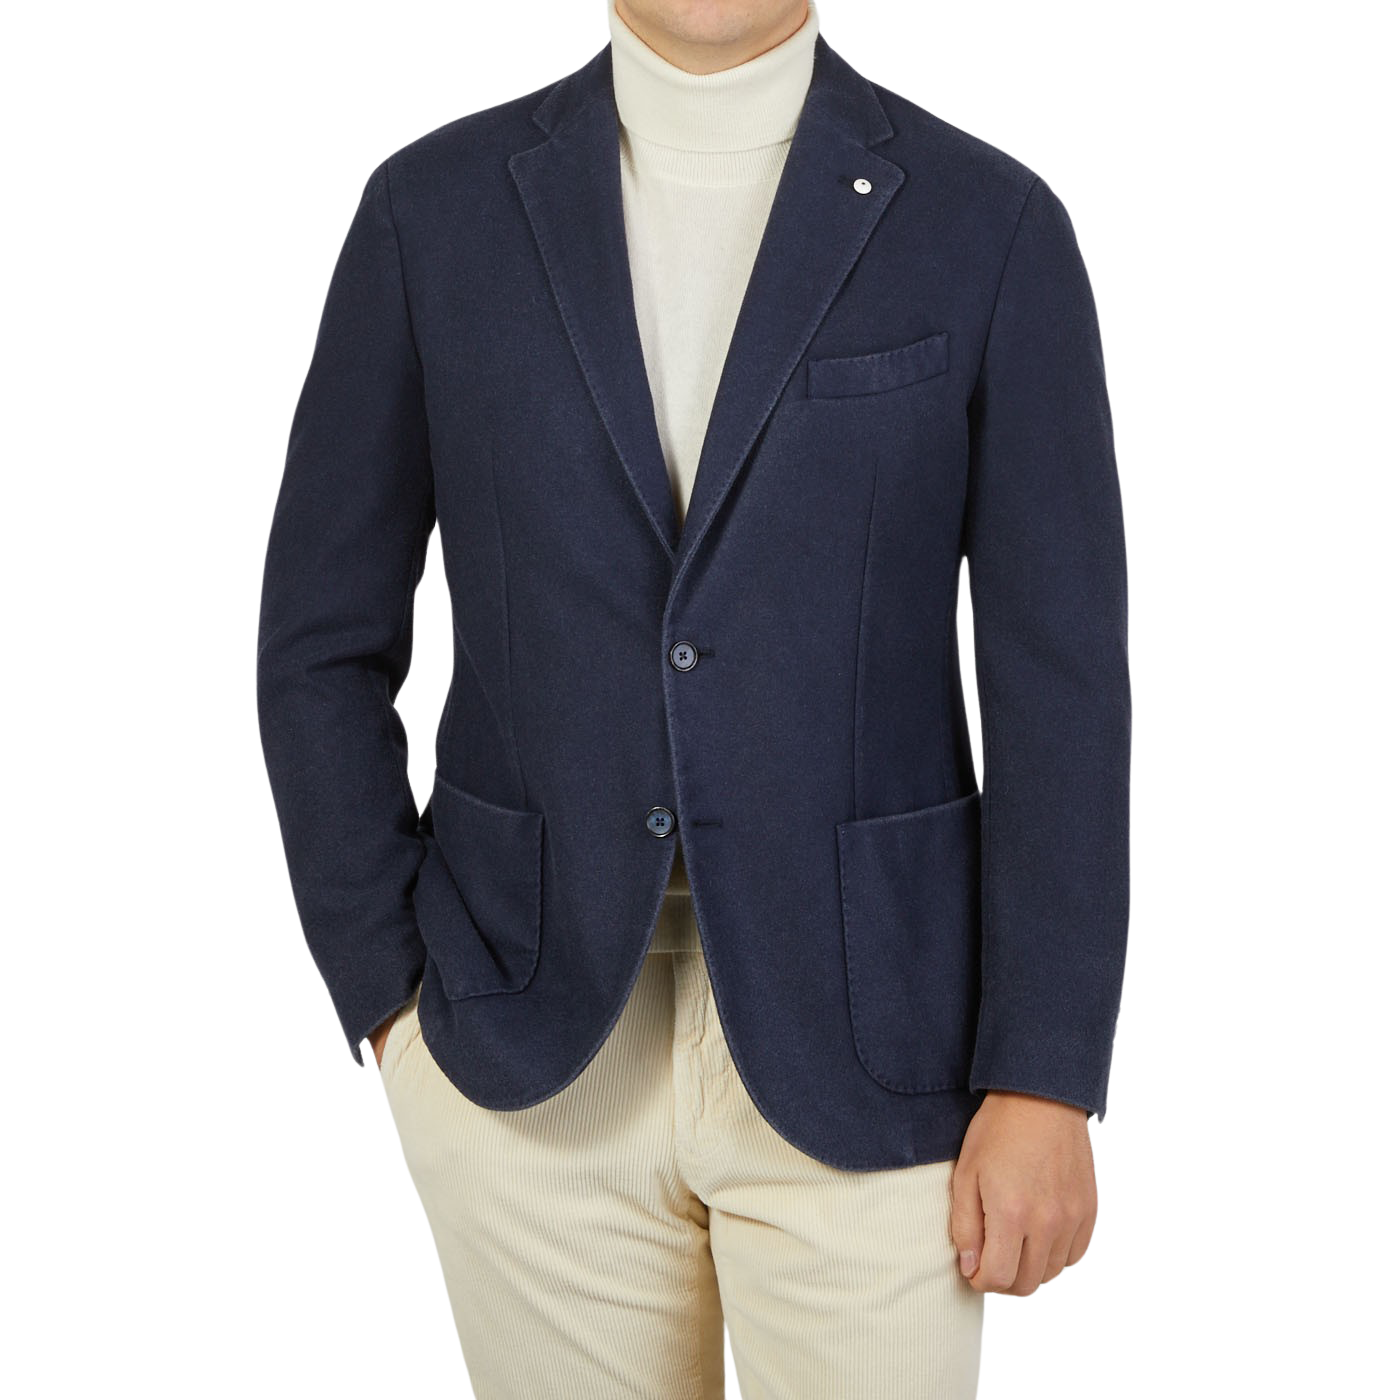 A man wearing a Dark Blue Washed Wool Cashmere Blazer from L.B.M. 1911, inspired by Italian fashion trends.